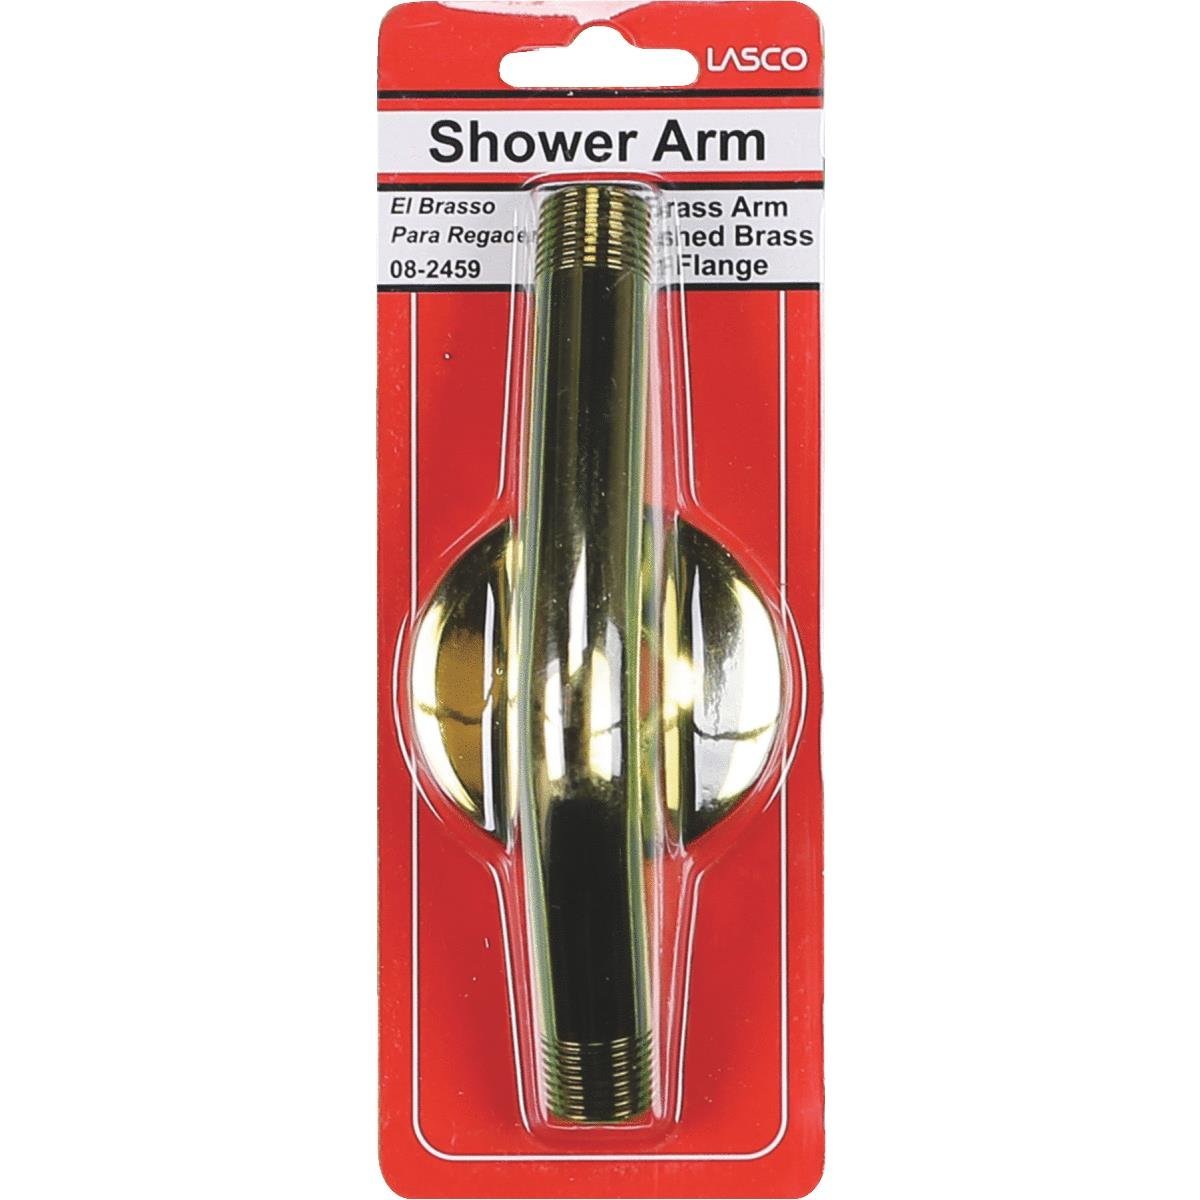 Lasco 08-2459 Shower Arm with Wall Flange, Polished Brass, 1/2" x 6"